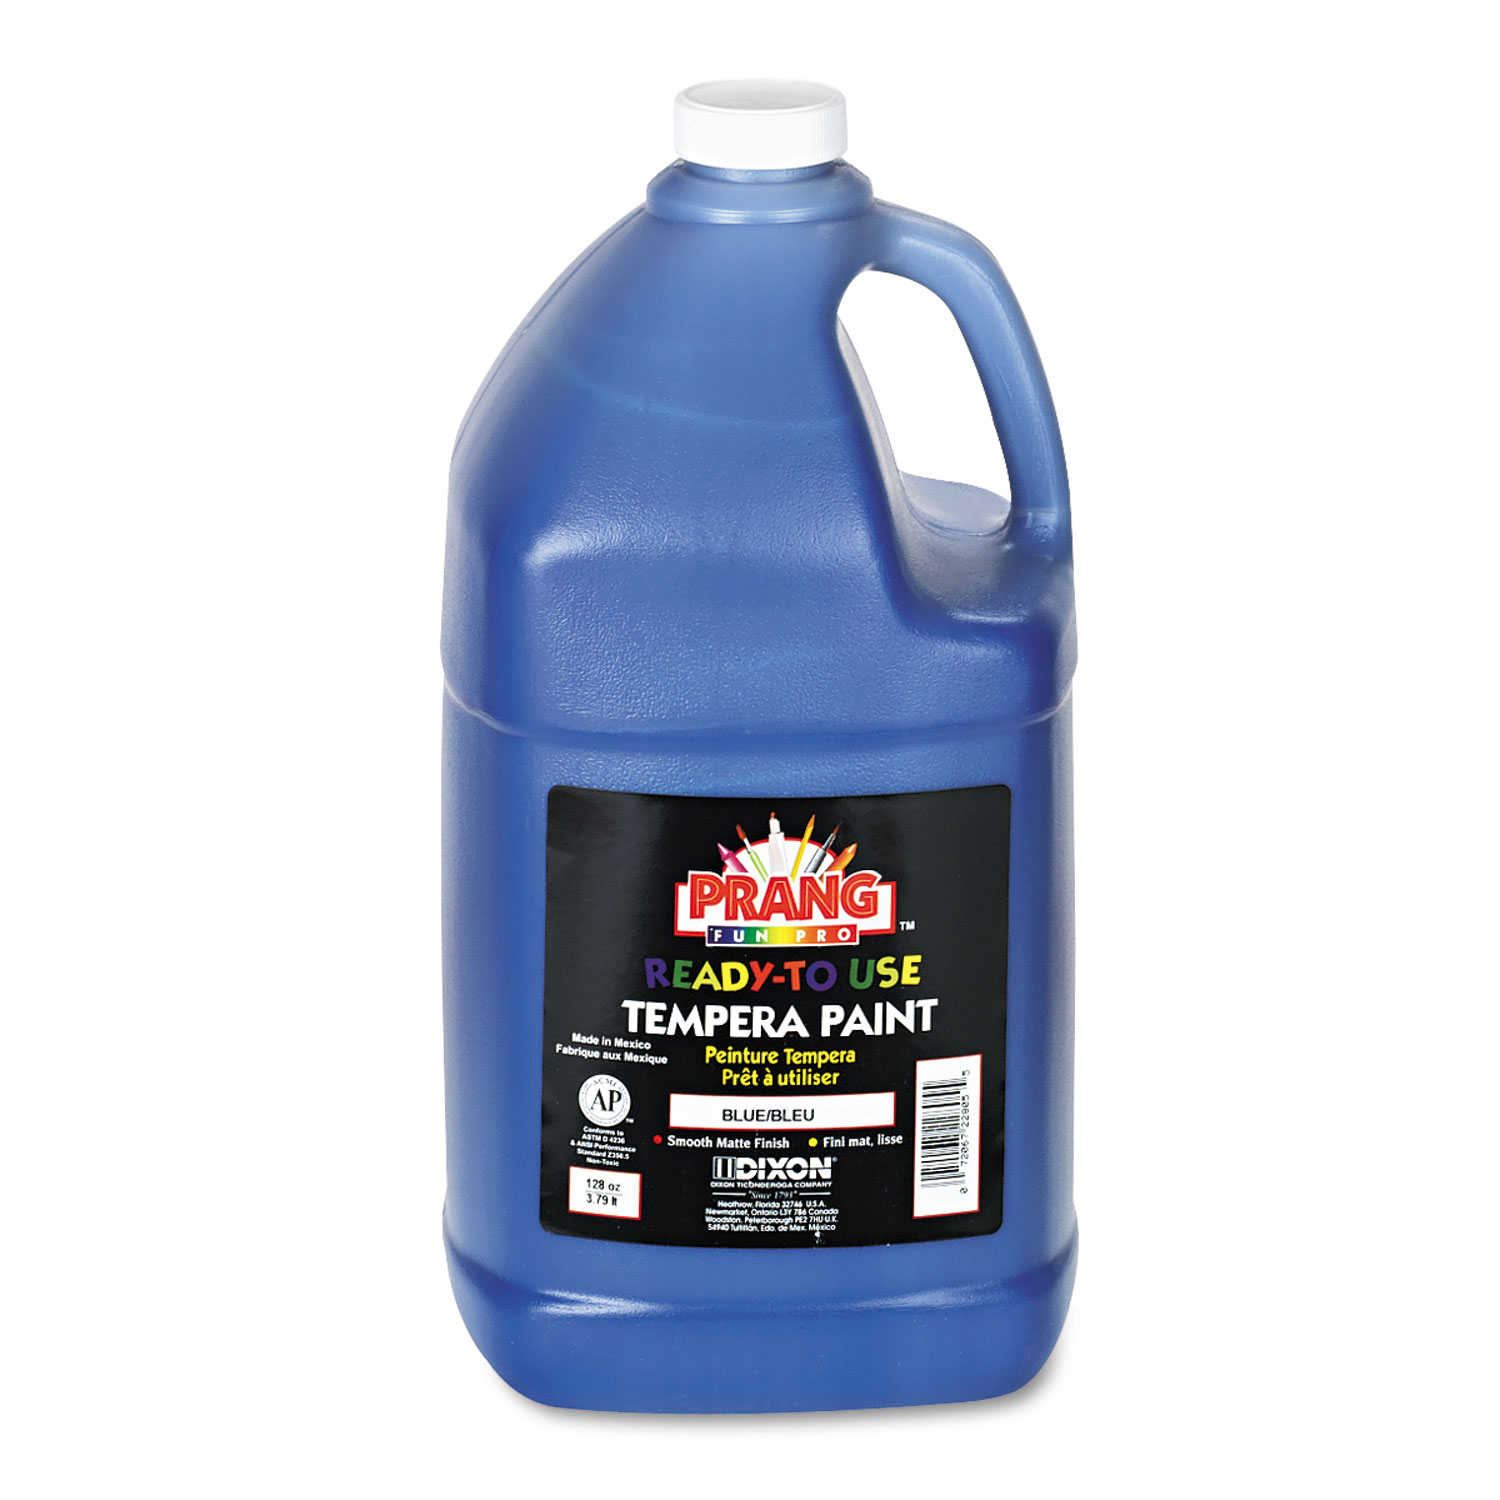 Ready-to-Use Tempera Paint, Blue, 1 gal